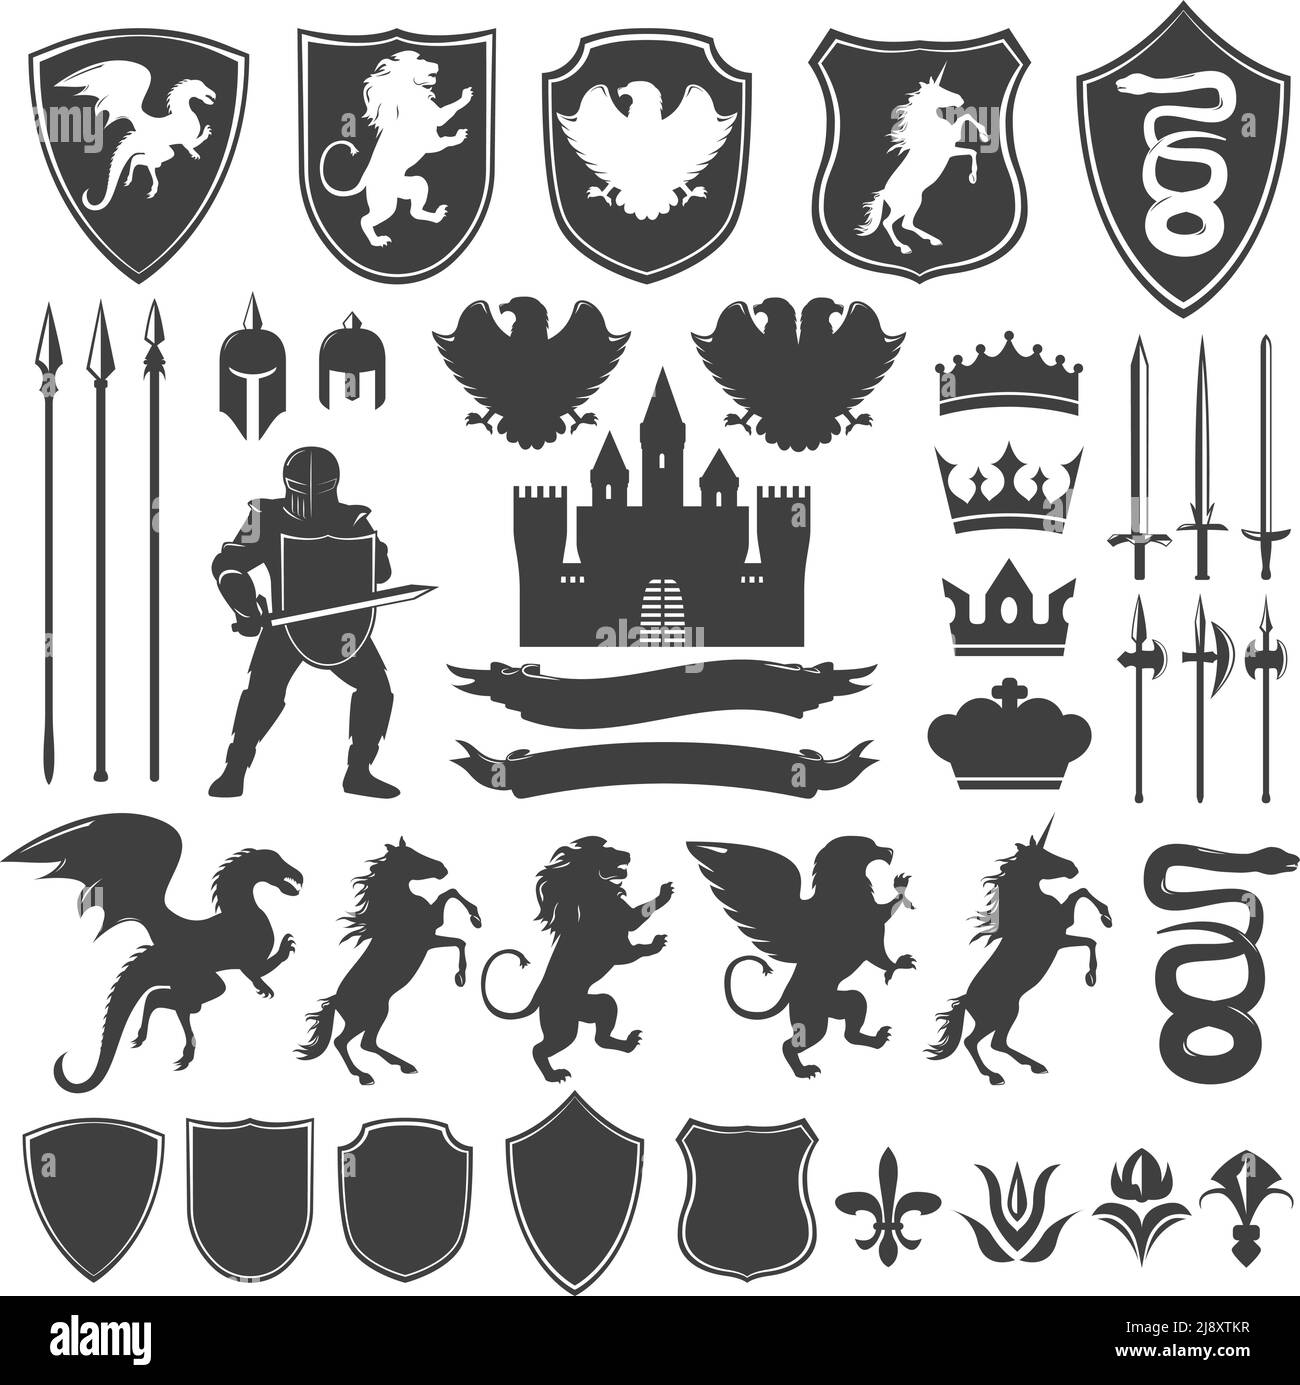 Heraldry decorative graphic icons set with medieval castle edged weapon shields flowers animals crowns isolated vector illustration Stock Vector